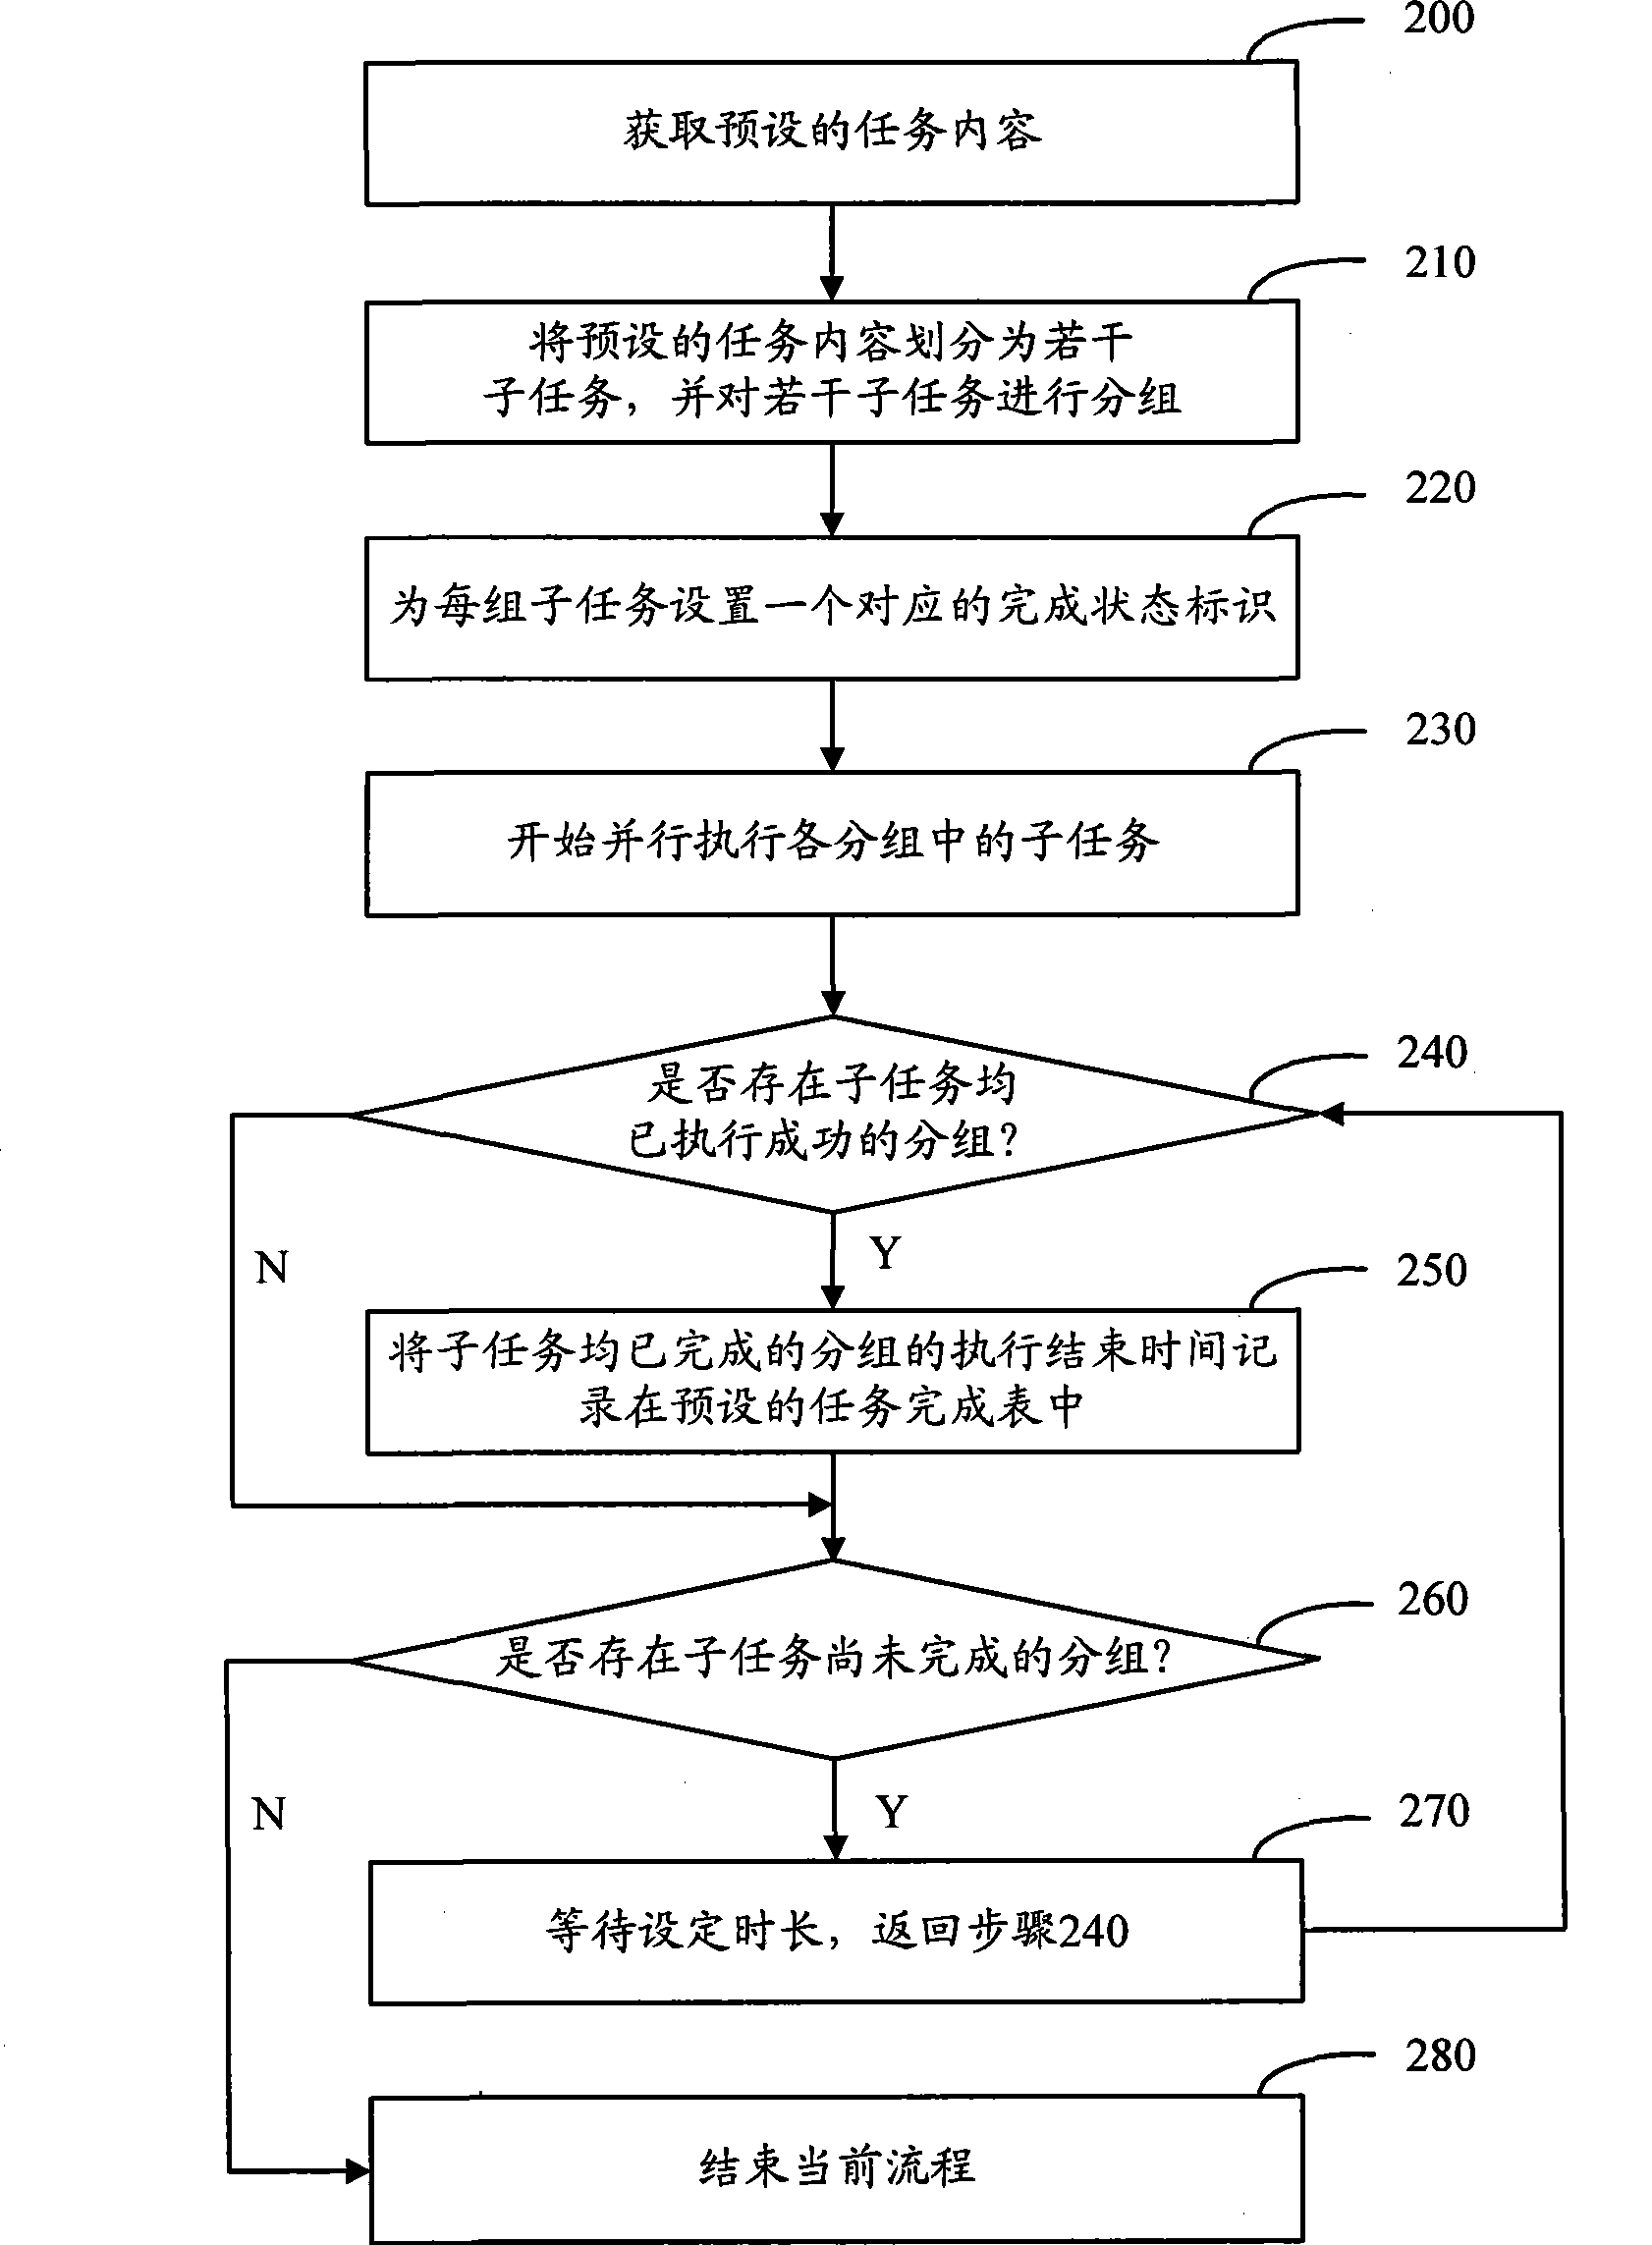 Method and apparatus for synchronizing foreground and background databases